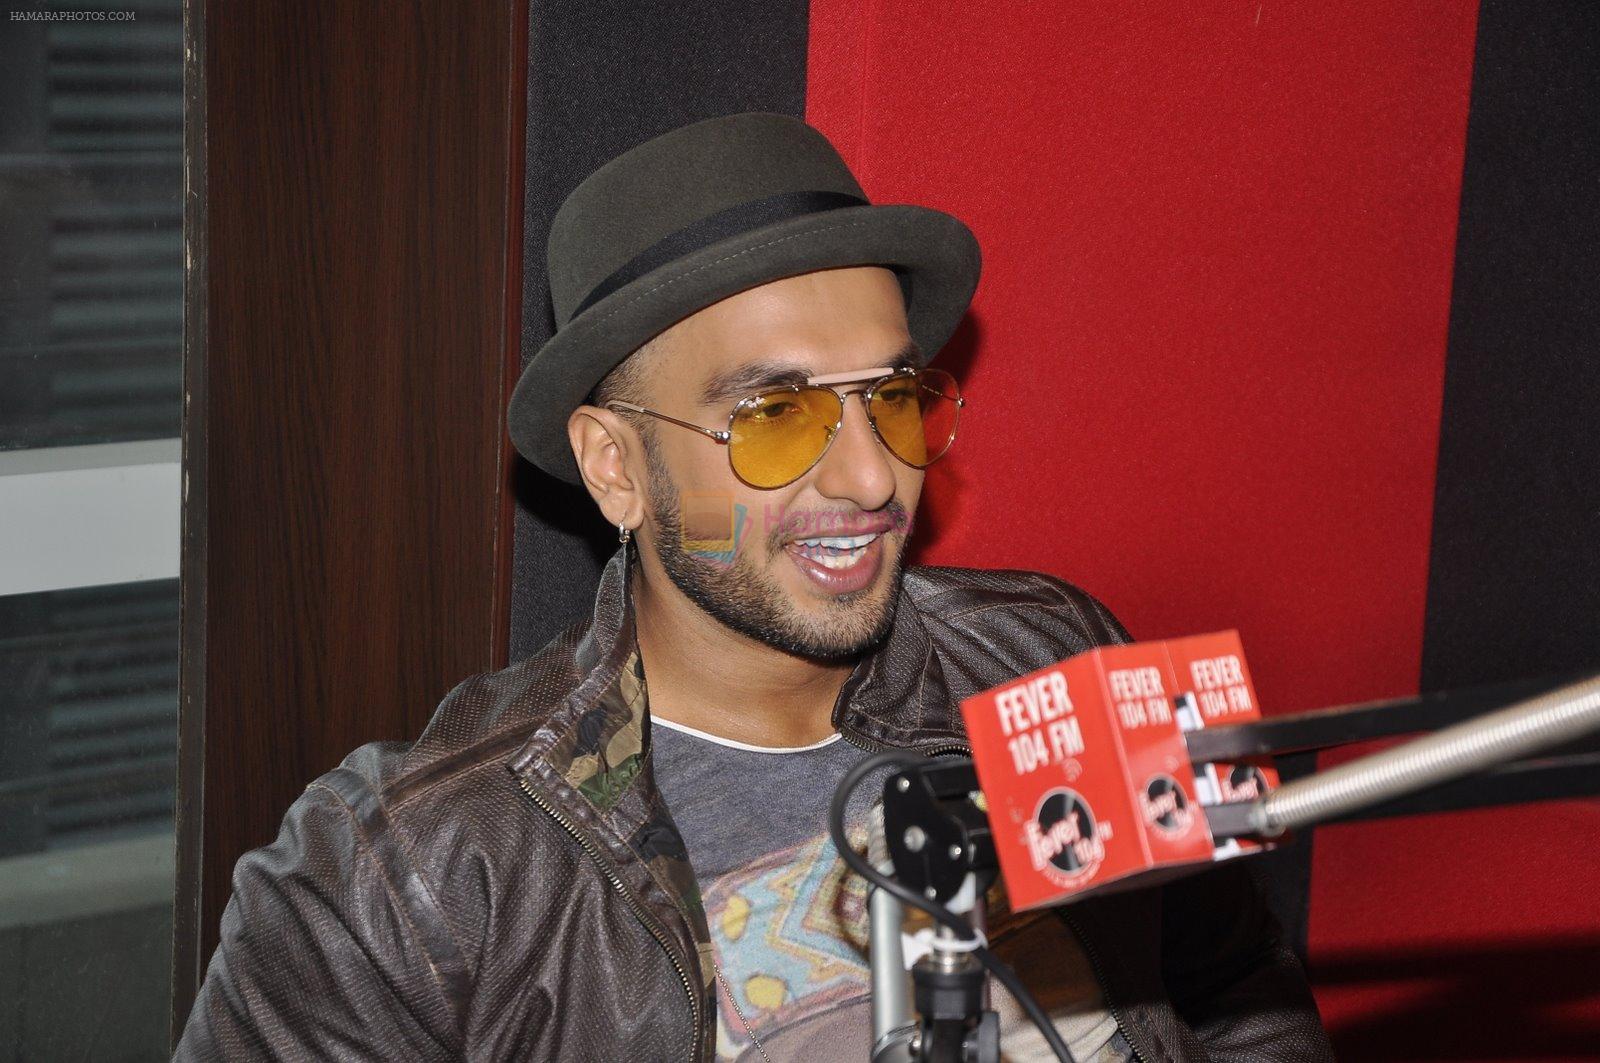 Ranveer Singh at Kill Dil promotions at Fever FM in Mumbai on 22nd Nov 2014